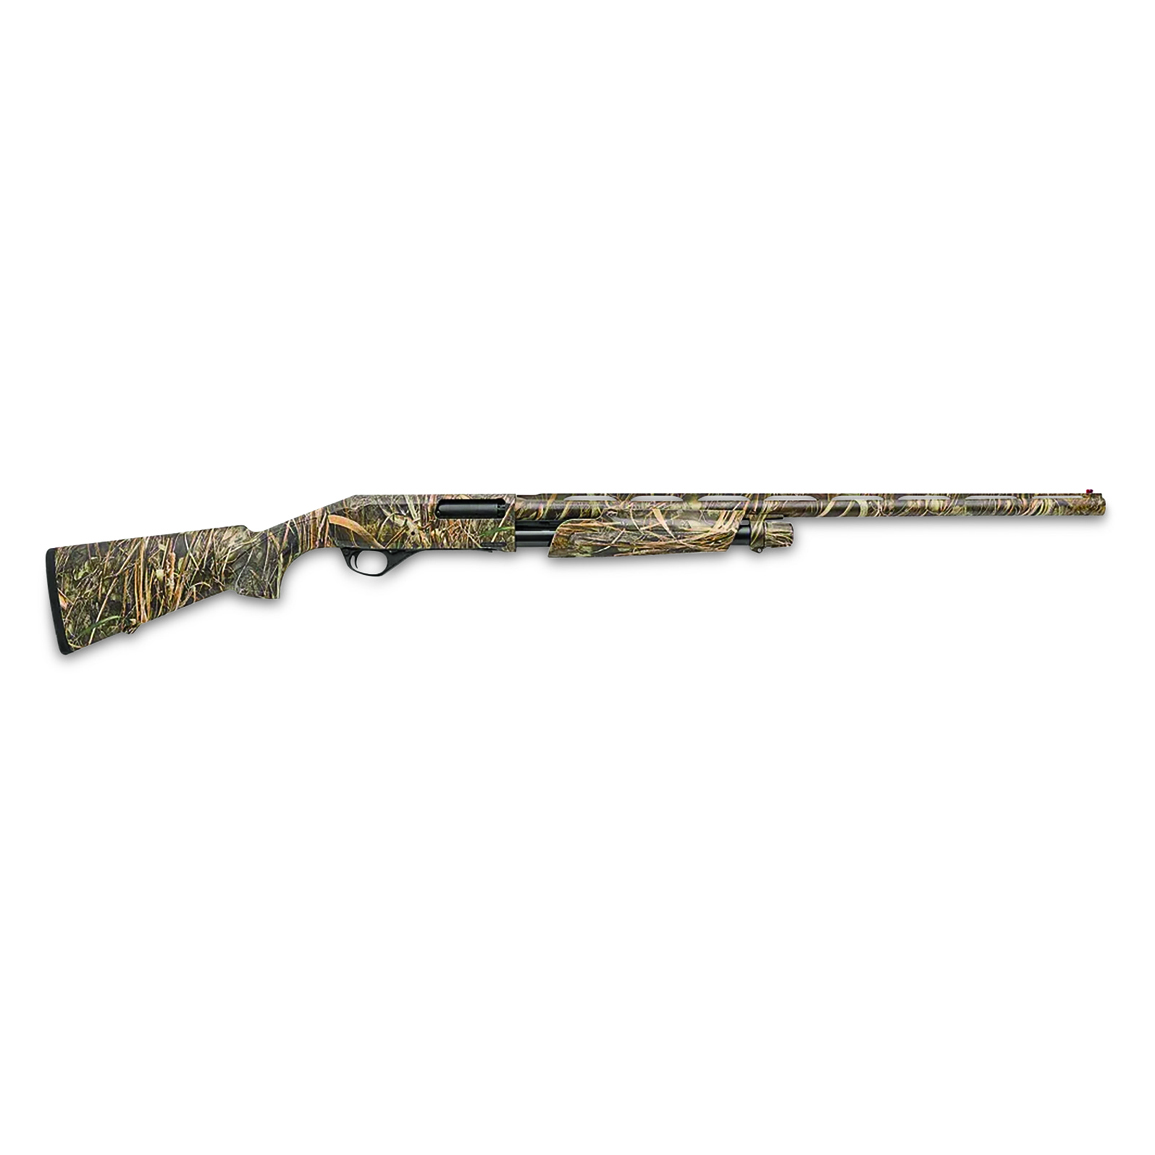 Stoeger P3000, Pump Action, 12 Gauge, 26" Barrel, Realtree MAX-7 Synthetic, 5+1 Rounds